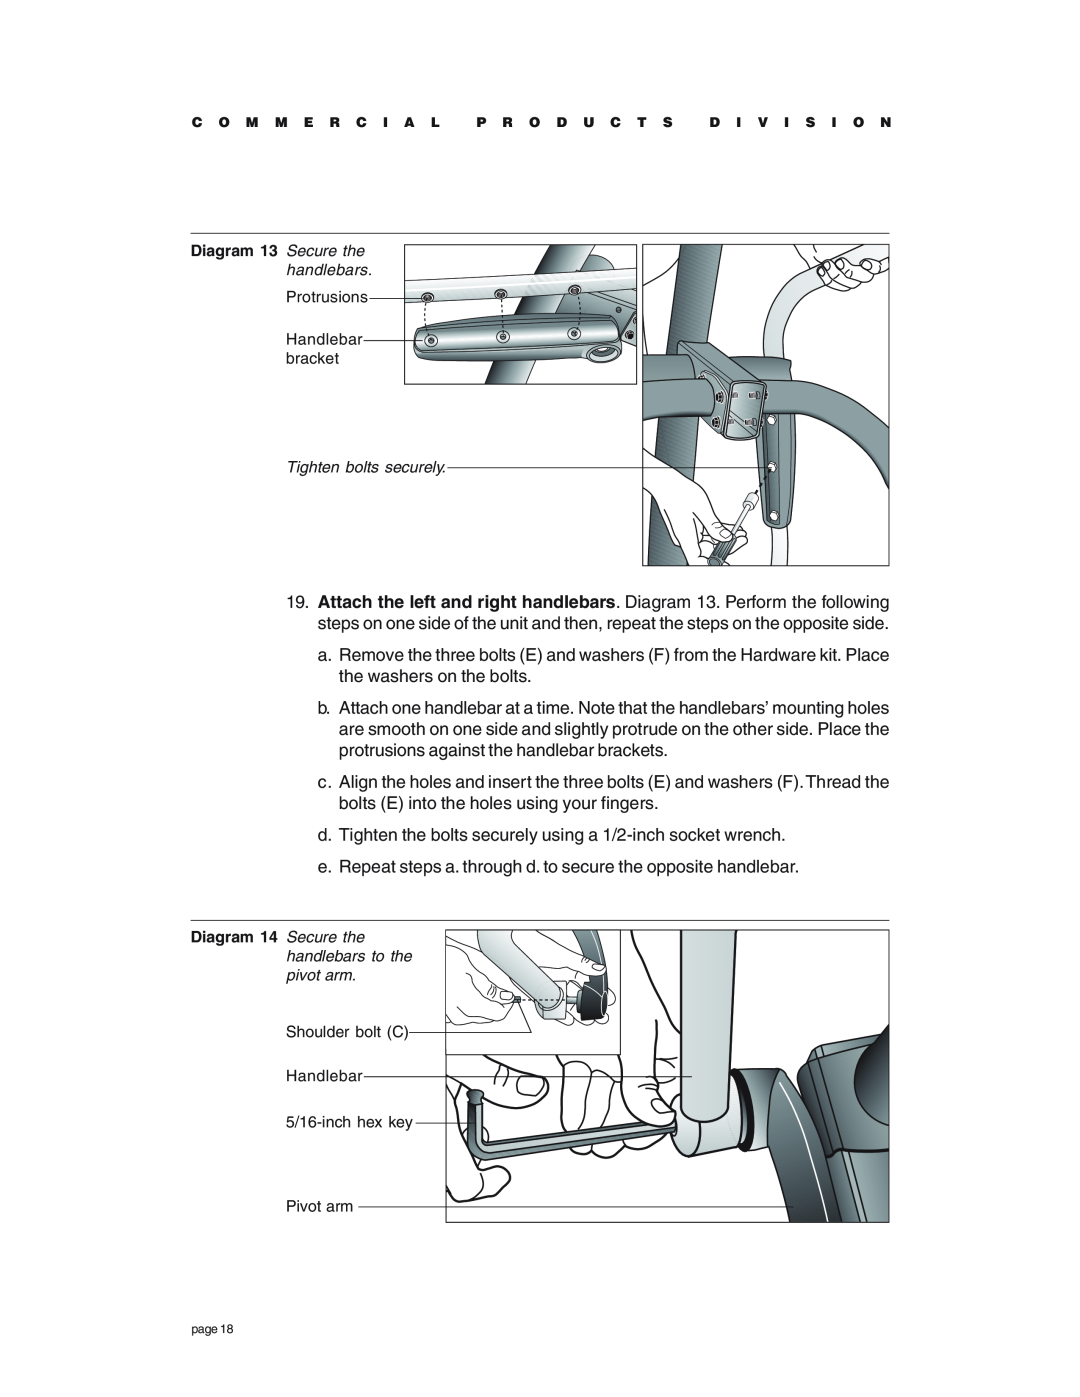 Precor EFX534 owner manual d. Tighten the bolts securely using a 1/2-inch socket wrench 